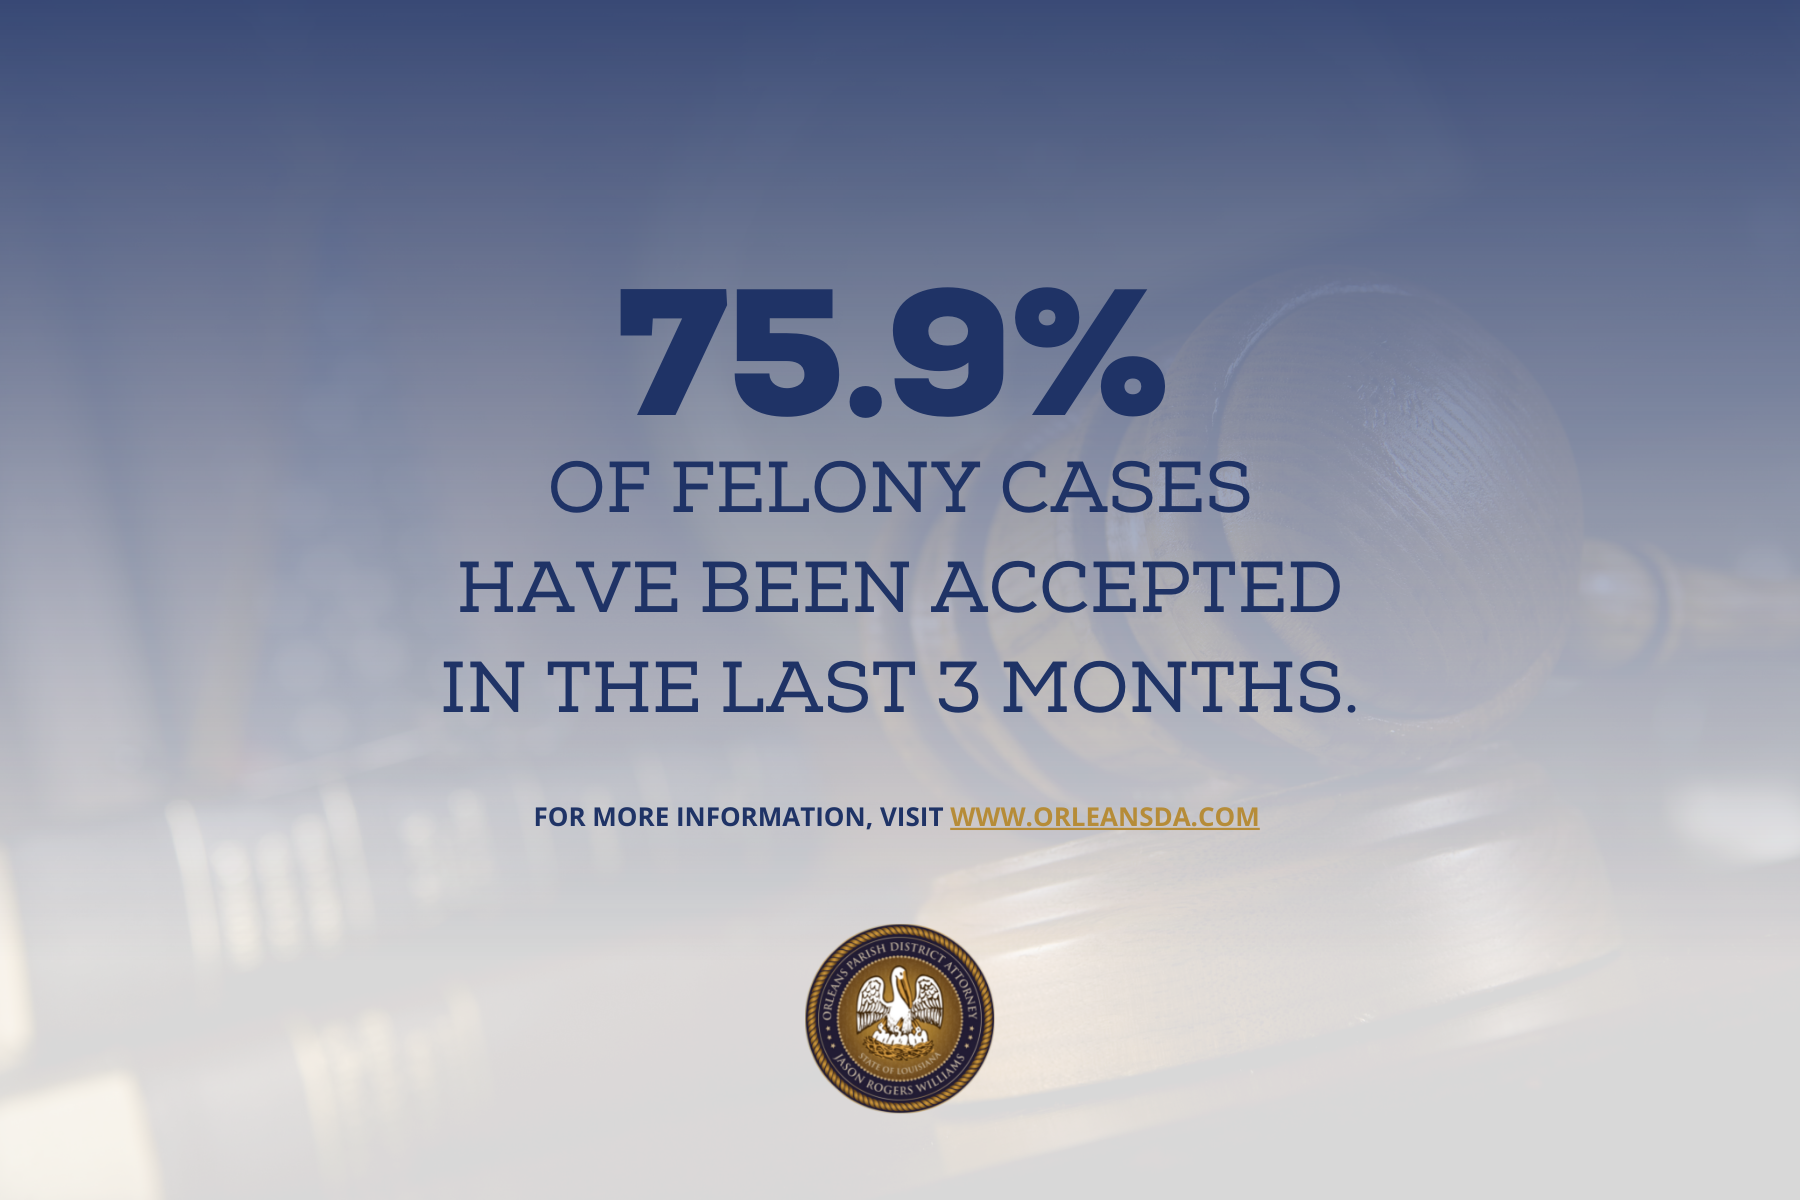 felony cases have been accepted in the last 3 months